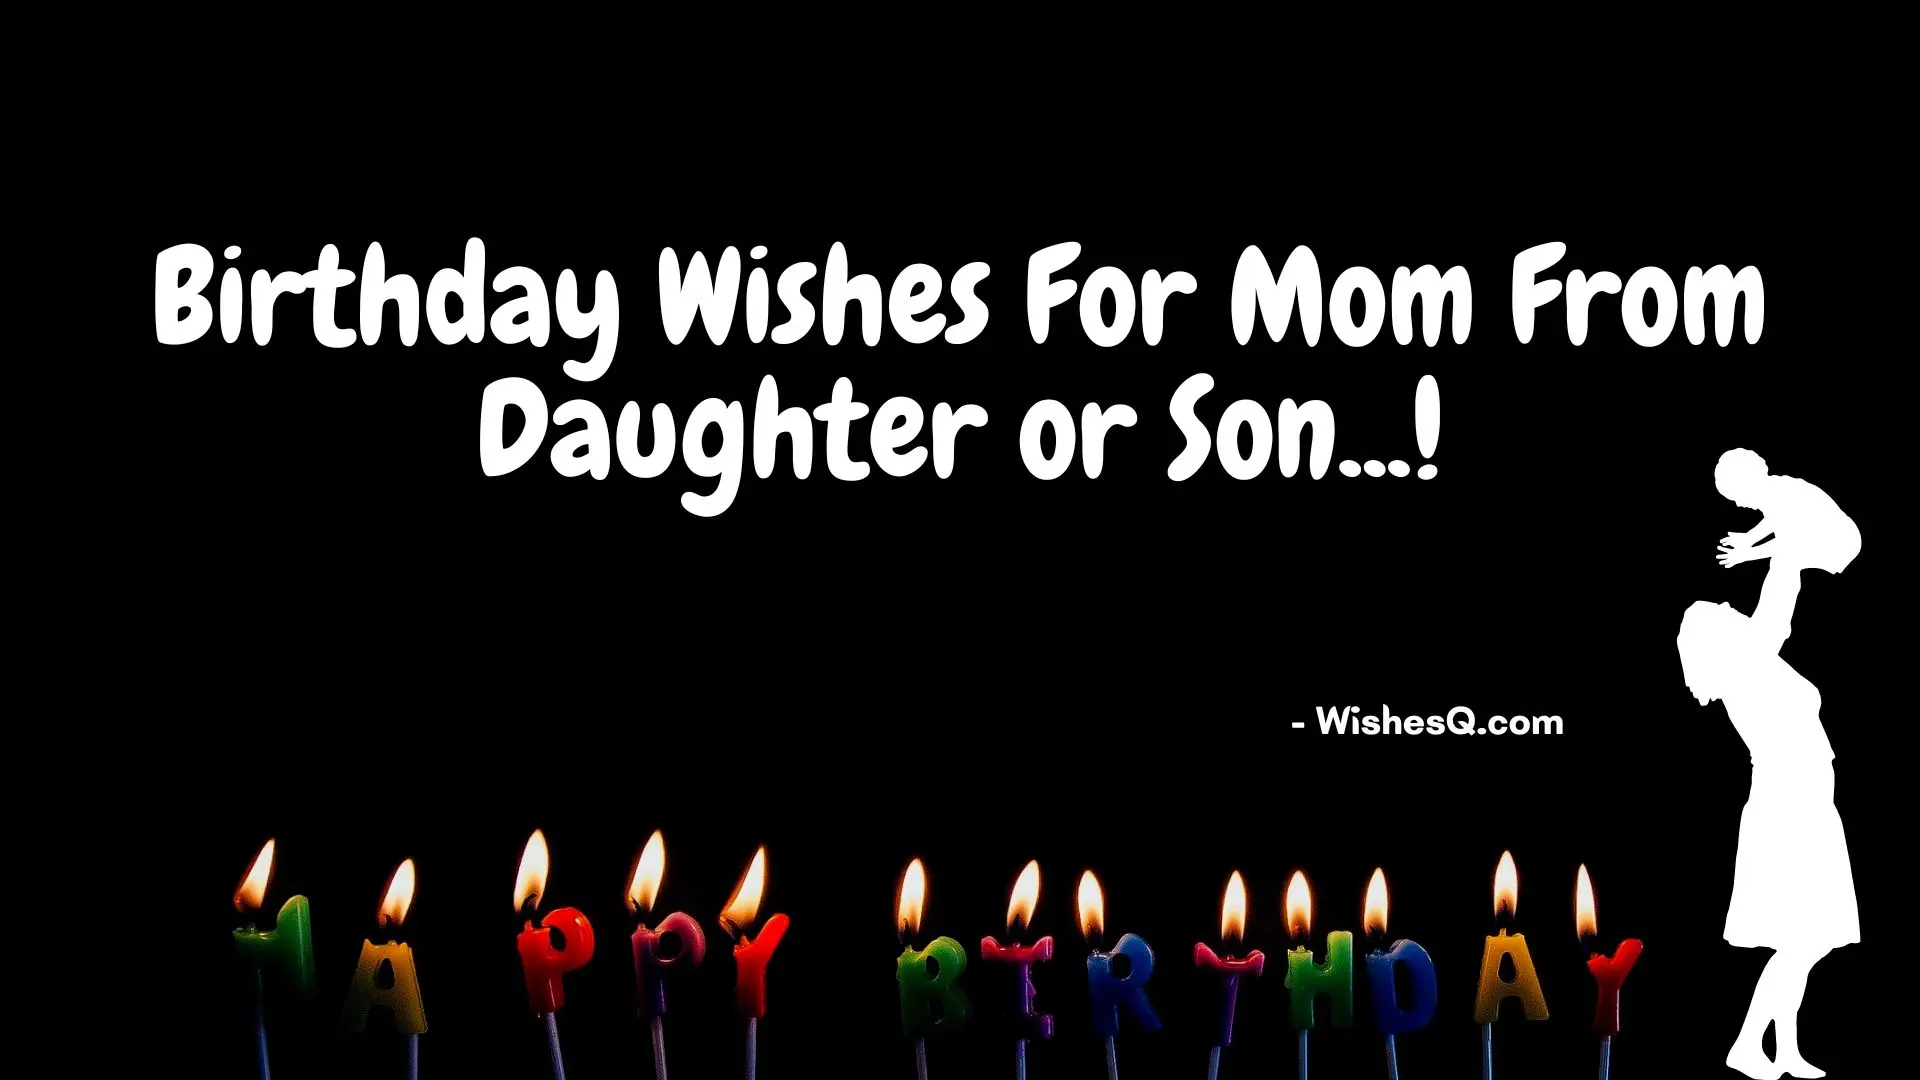 Best Birthday Wishes For Mom From Daughter, Birthday Wishes For Mom From Son, Deep Birthday Wishes For Mom From Daughter, Funny Birthday Wishes For Mom From Daughter, Heart Touching Birthday Wishes For Mom From Daughter, Birthday Wishes For Mother From Daughter, Happy Birthday Mom Quotes From Daughter, and Deep Birthday Wishes For Mom From Son.